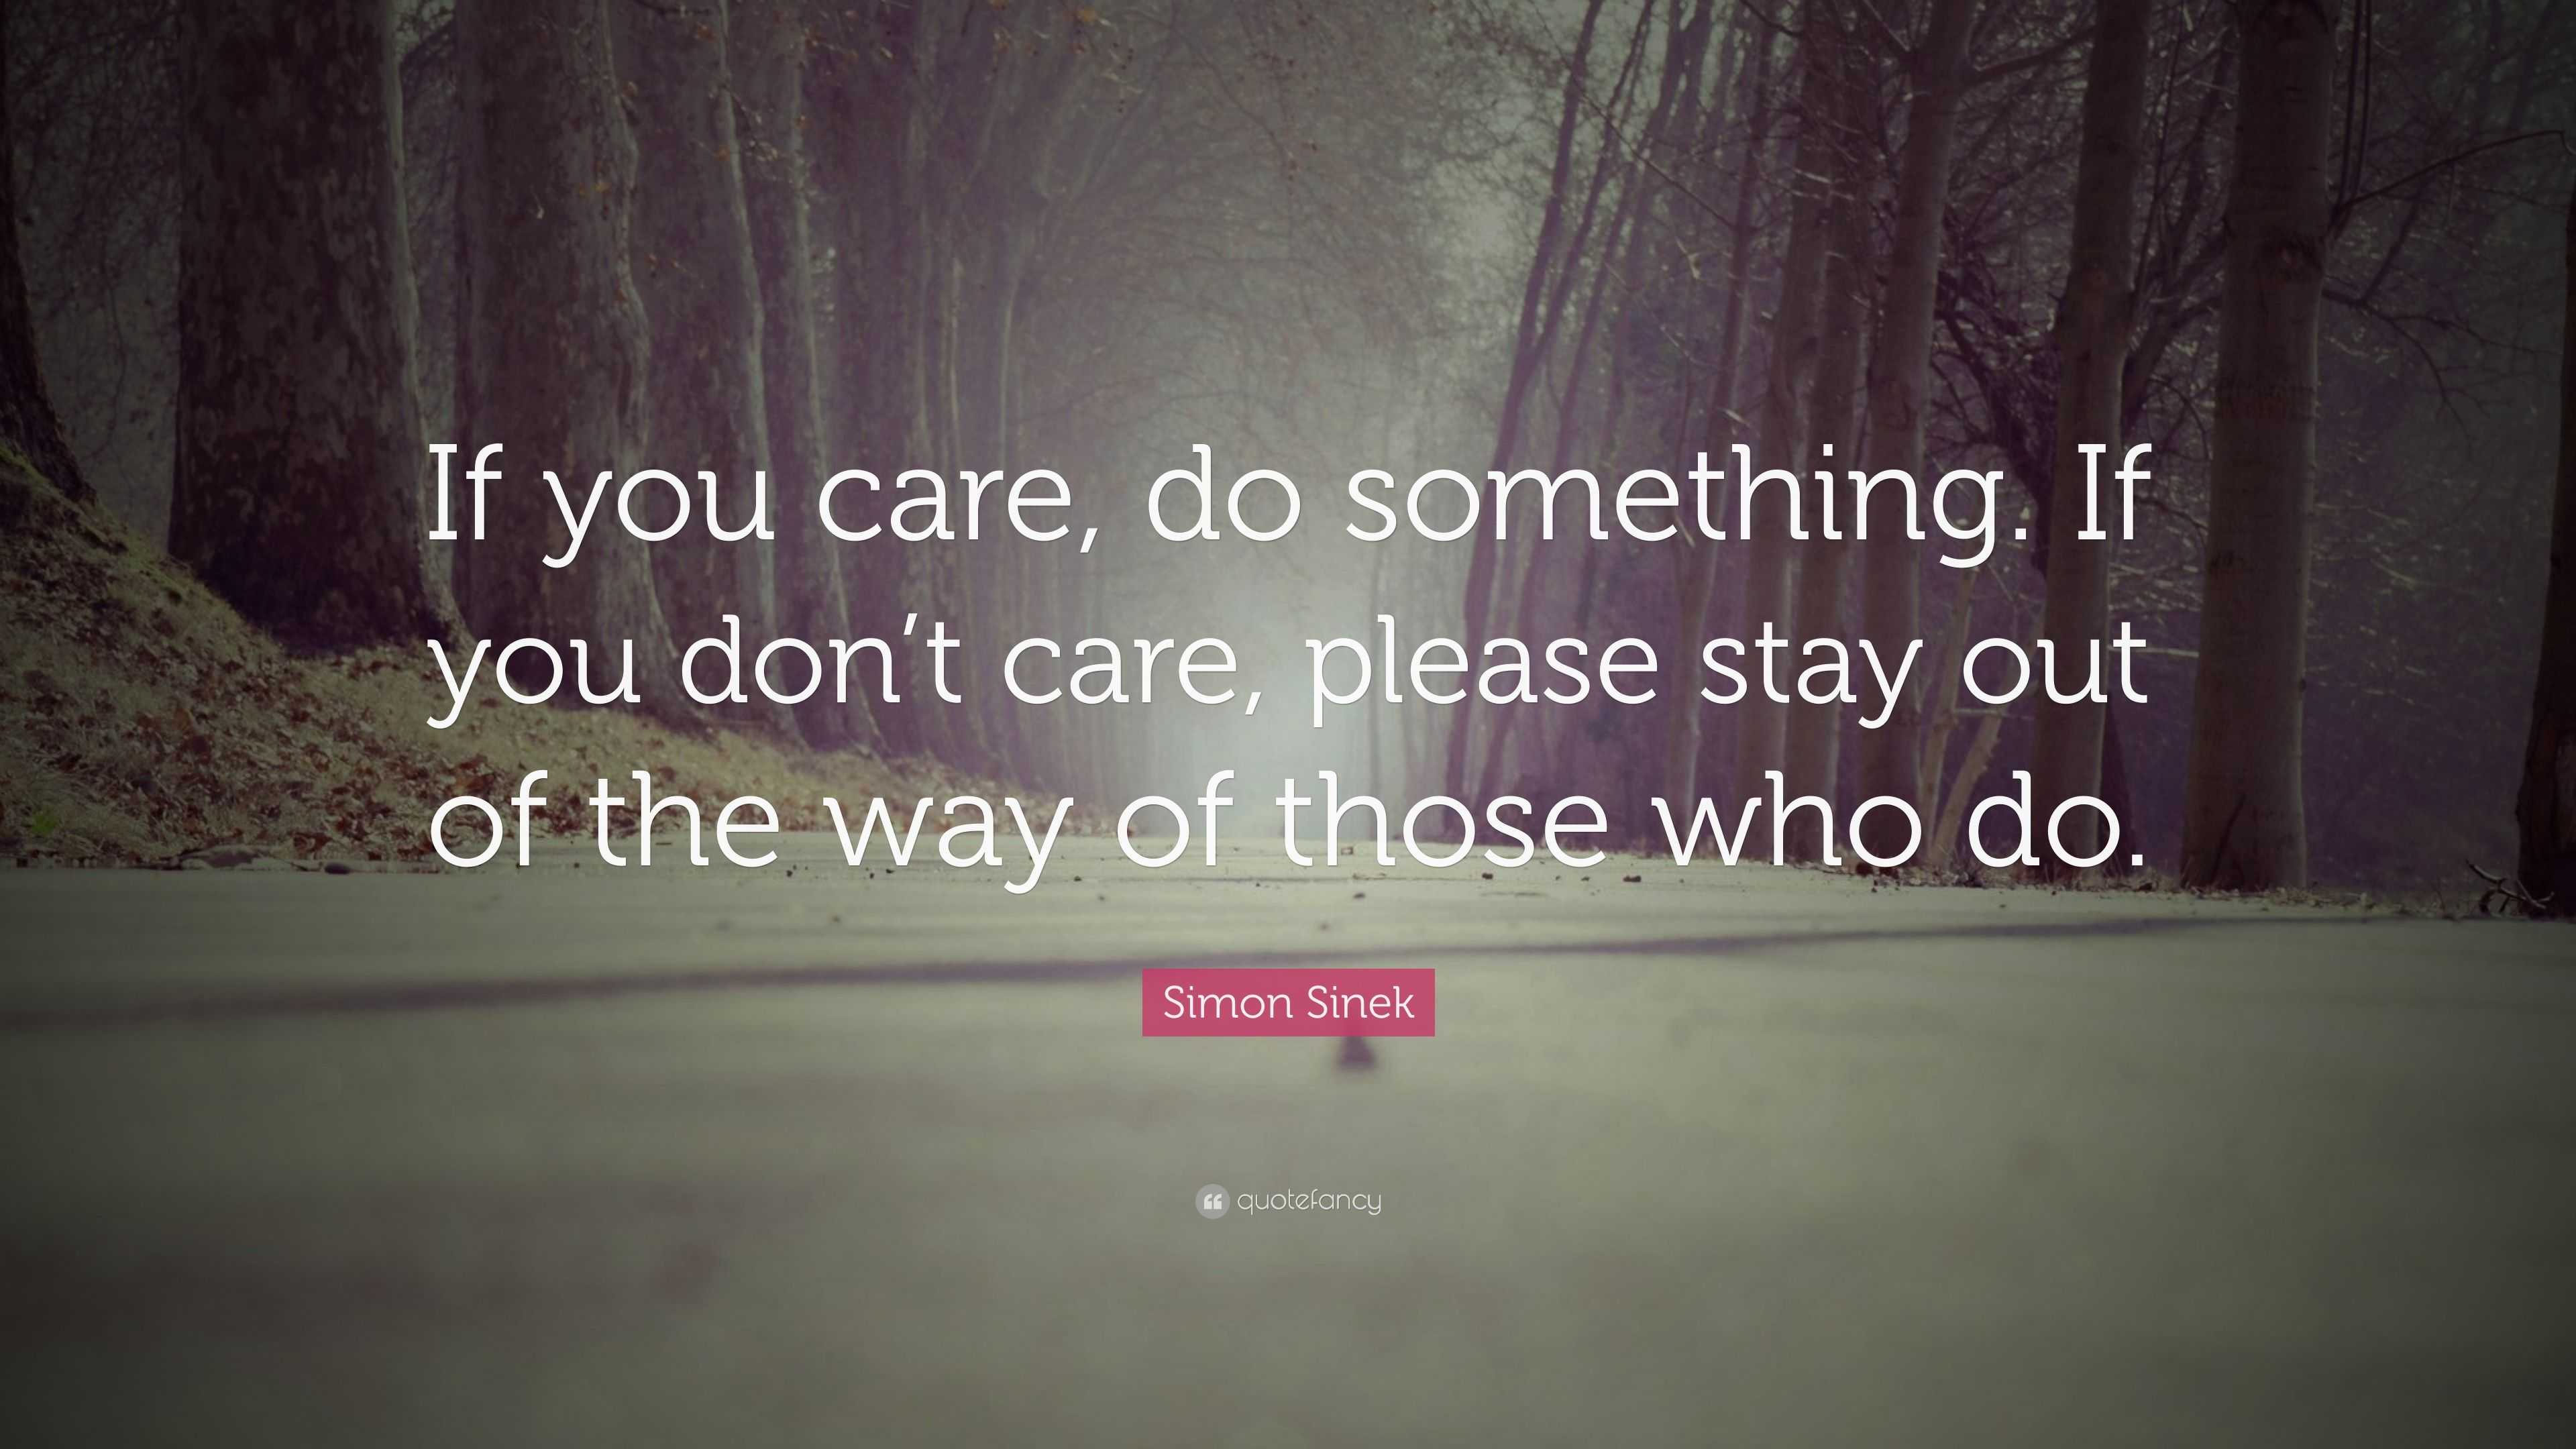 If you care, do something. 